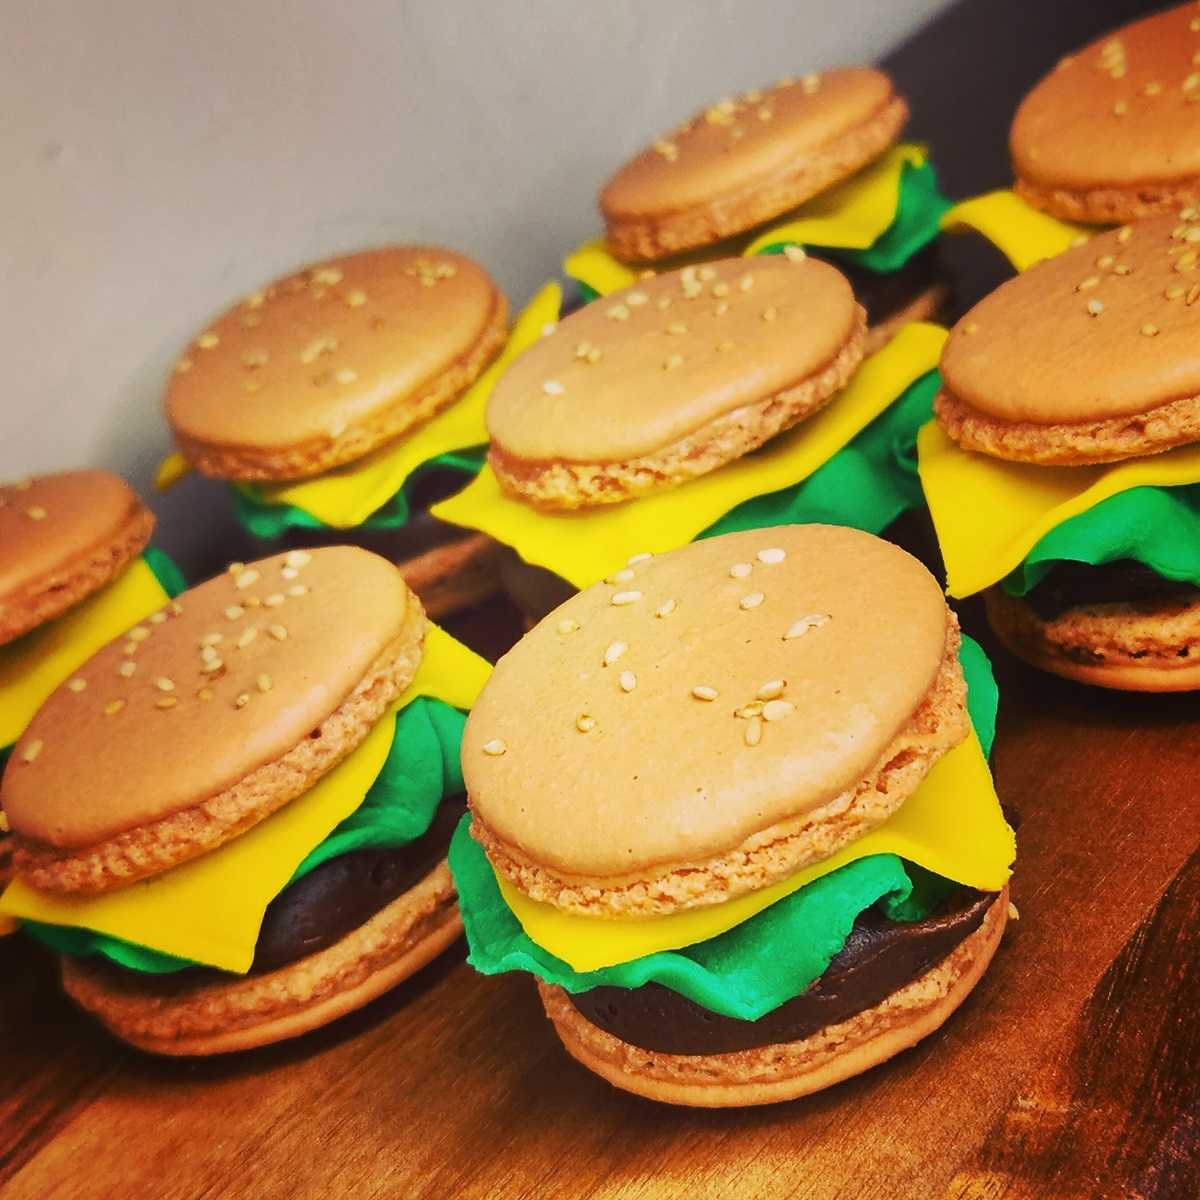 I Made These Little Cheeseburger Macarons Filled With Homemade Chocolate Ganache